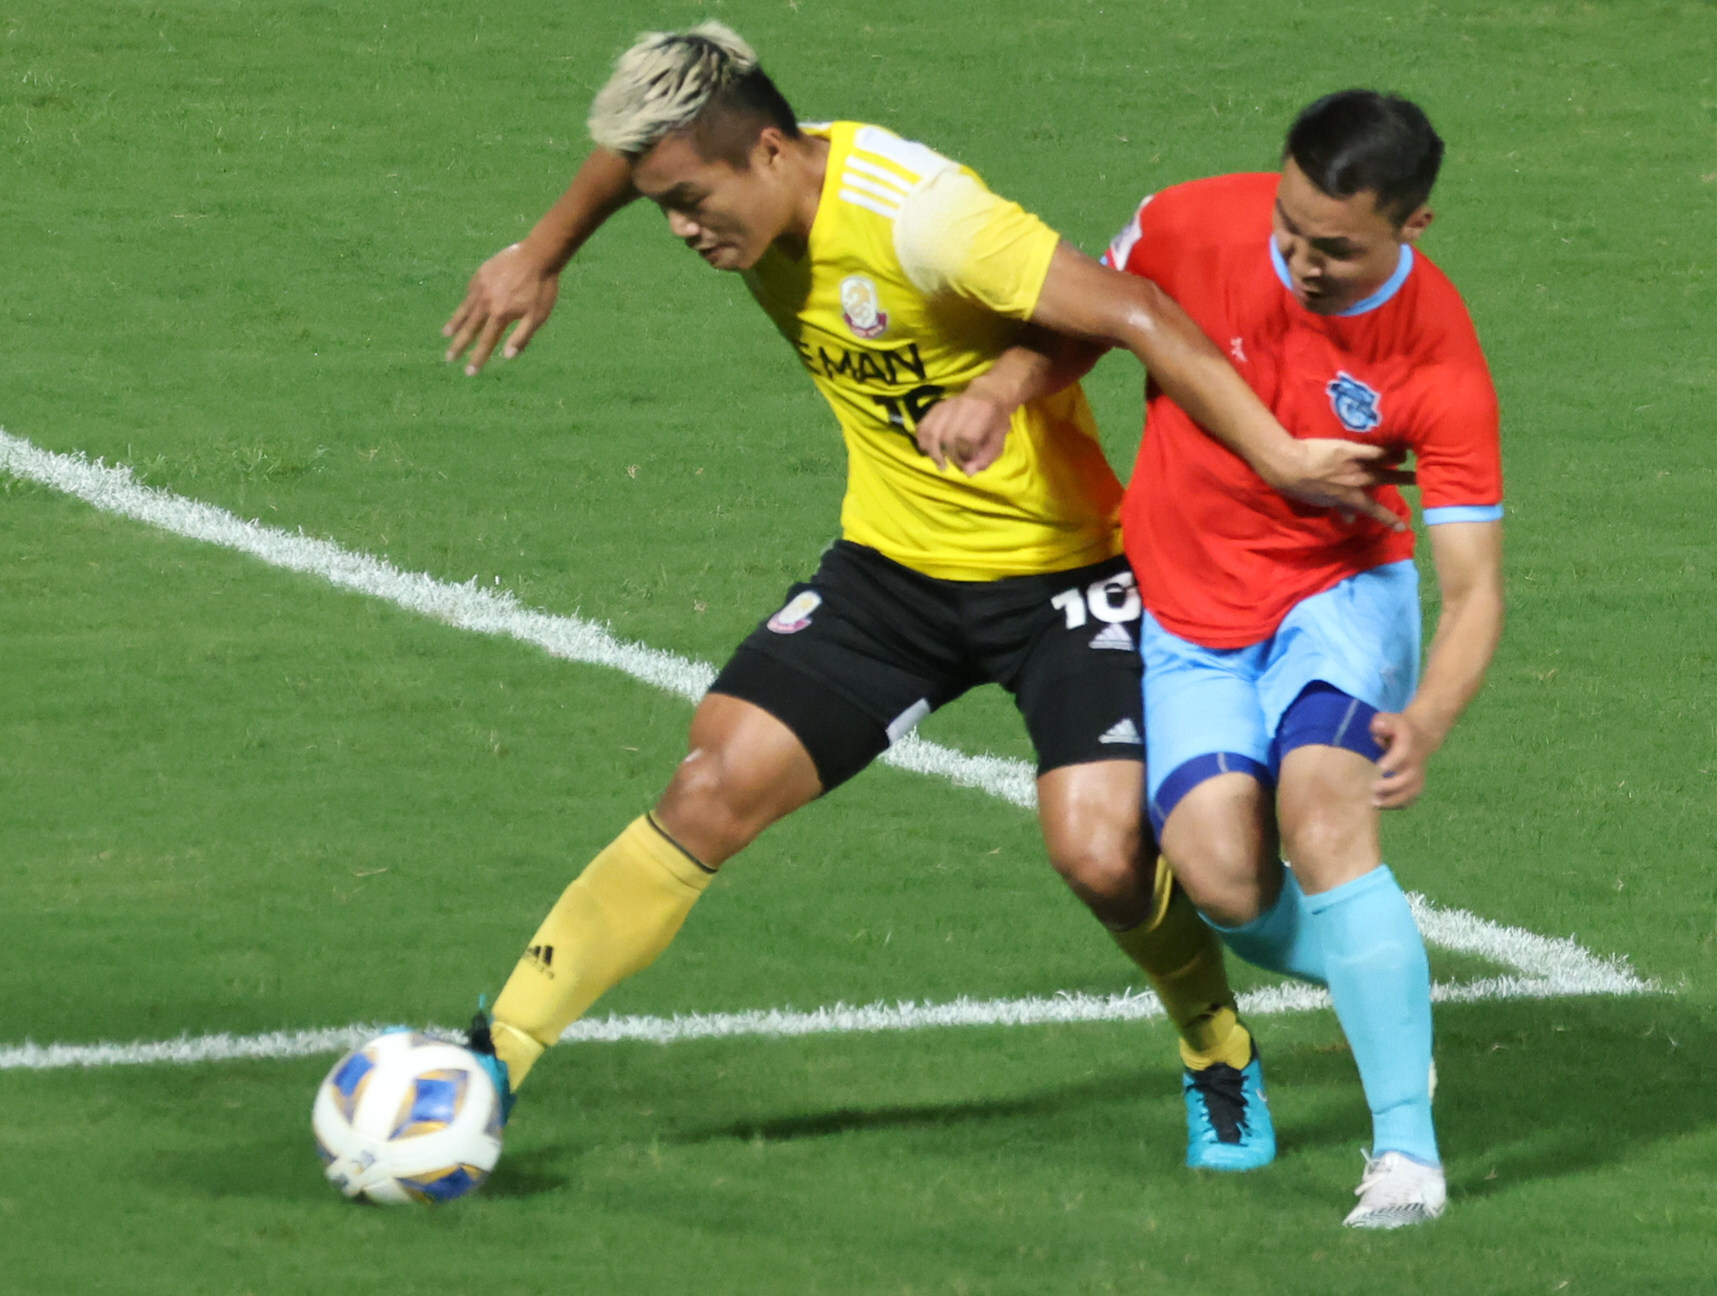 Lee Man also met Athletic 220 of Mongolia in last year’s AFC Cup. Midfielder Ngan Lok-fung (yellow) tries to get away from Enkhbileg Purevdorj when they beat the Mongolian side 5-1 at Tseung Kwan O Sports Ground. Photo: K. Y. Cheng